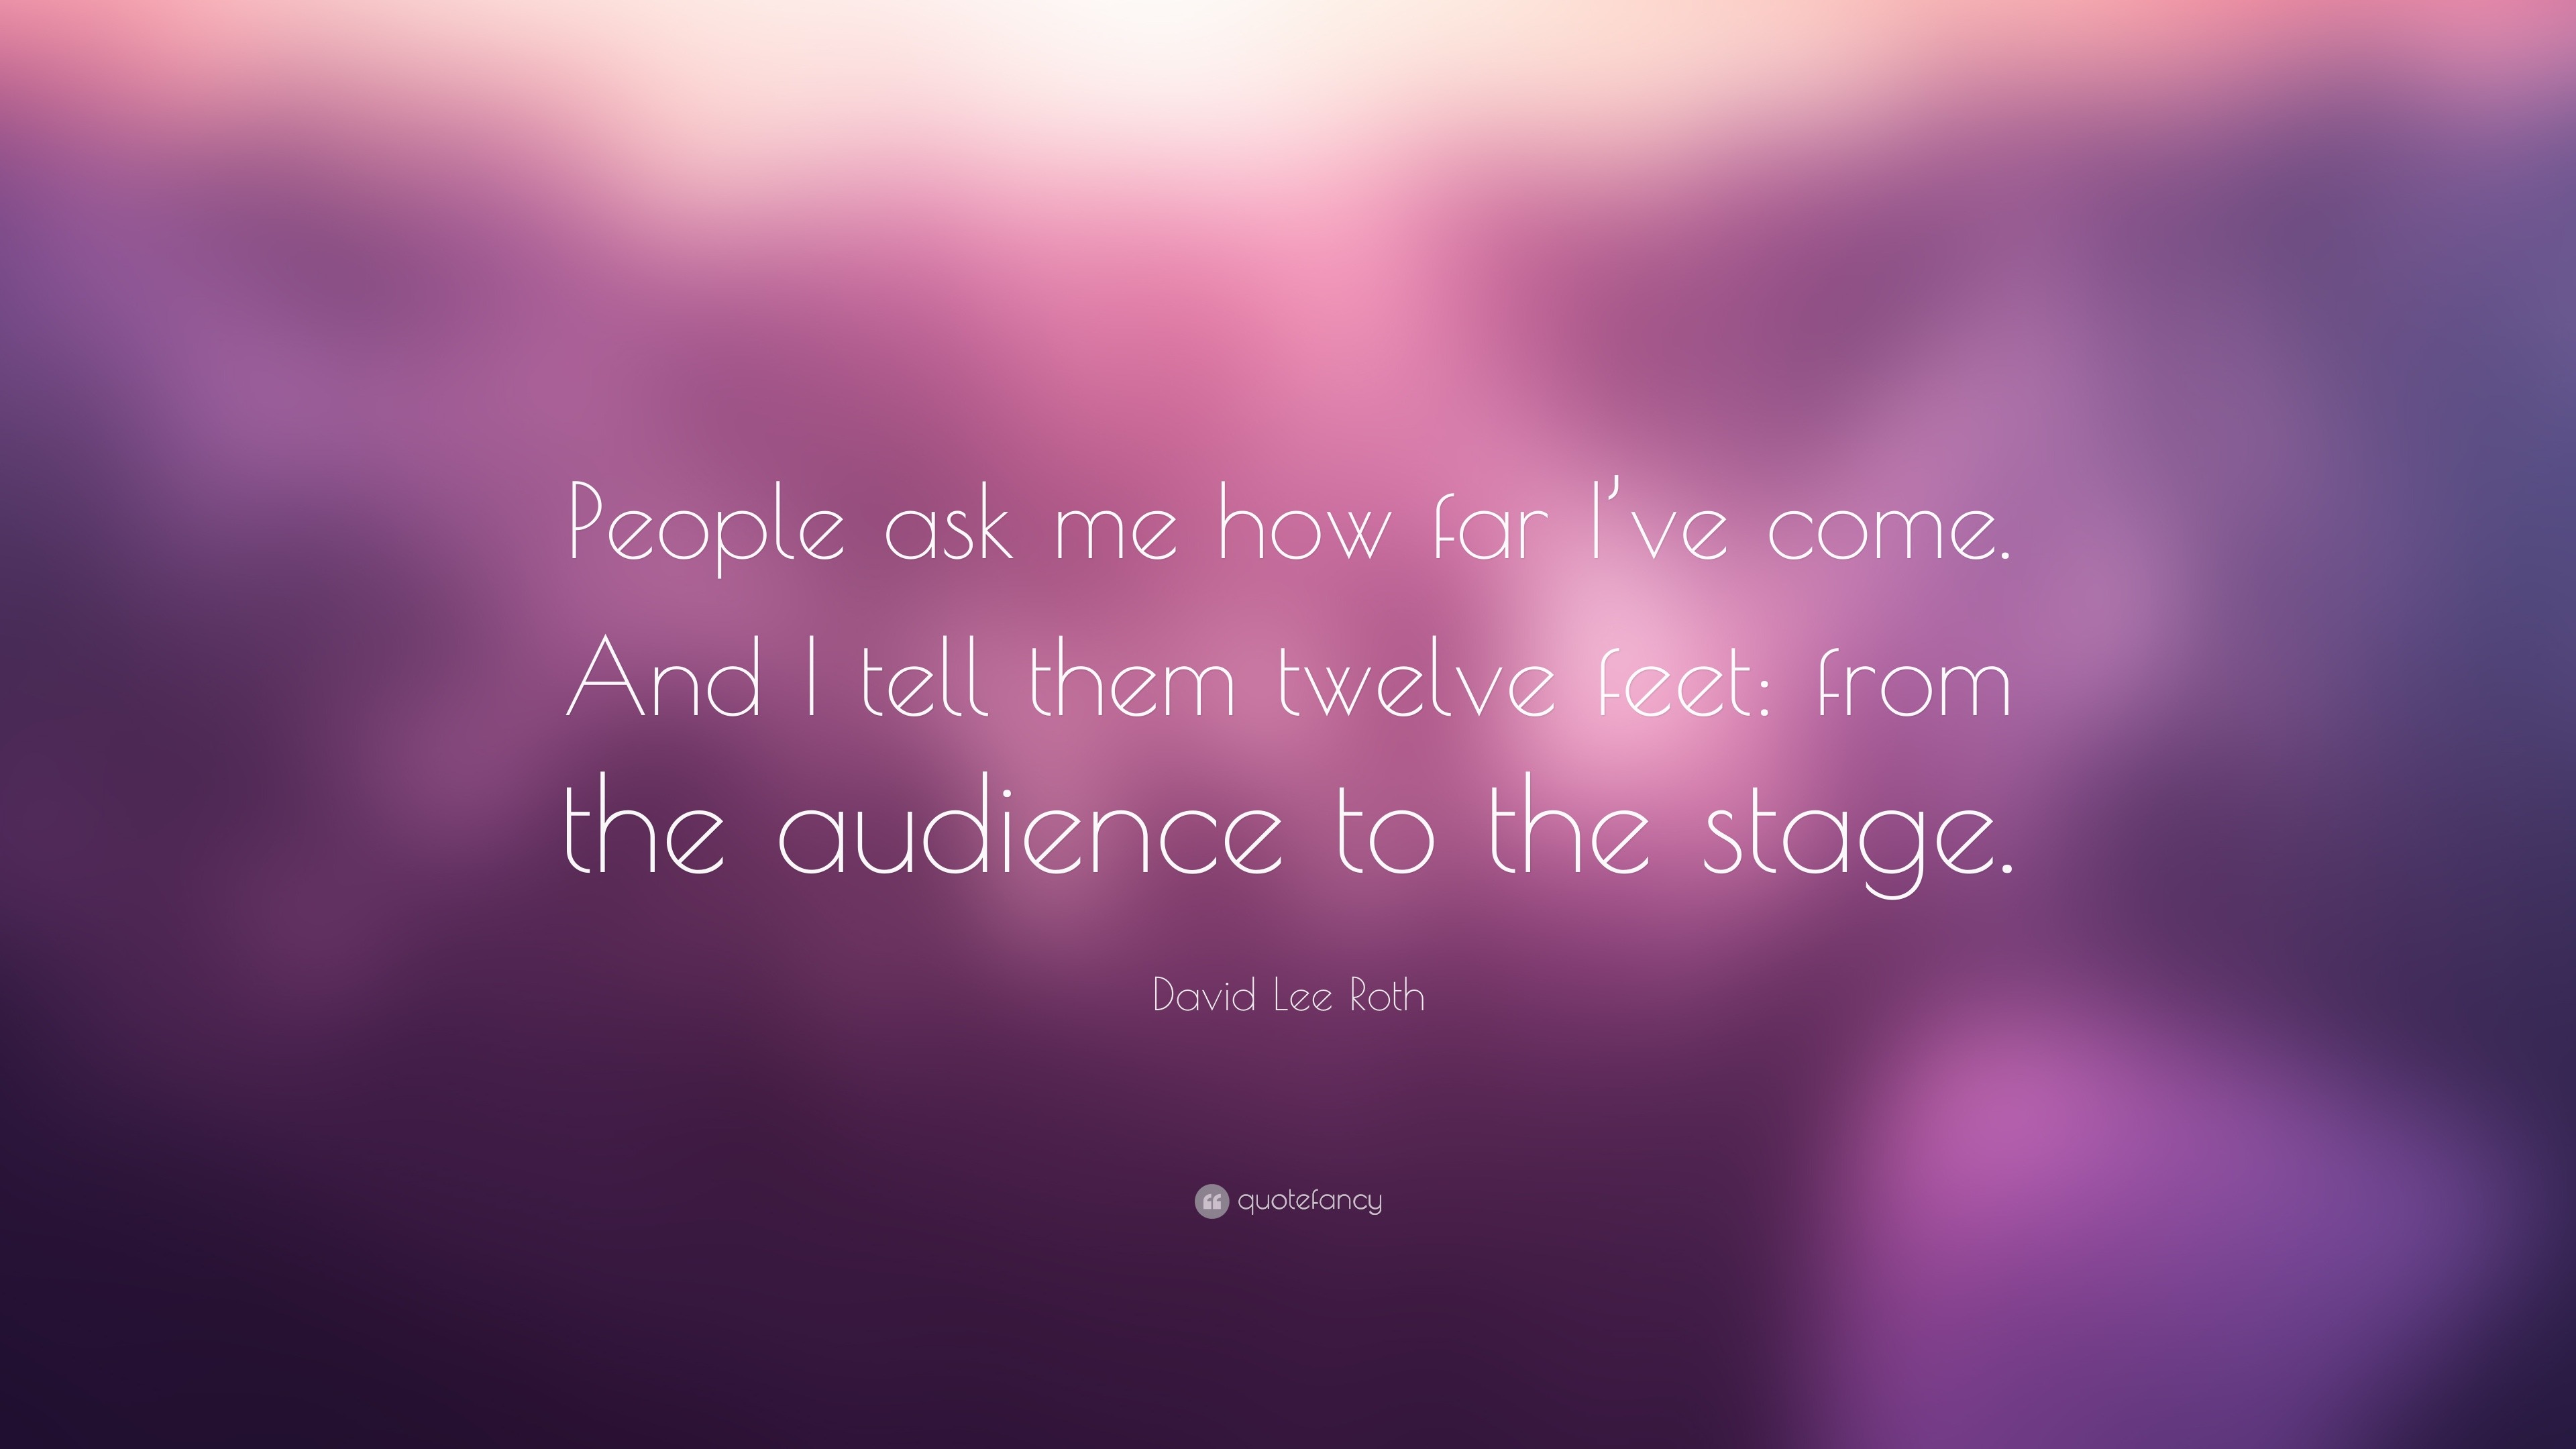 David Lee Roth Quote: “People Ask Me How Far I've Come. And I Tell Them